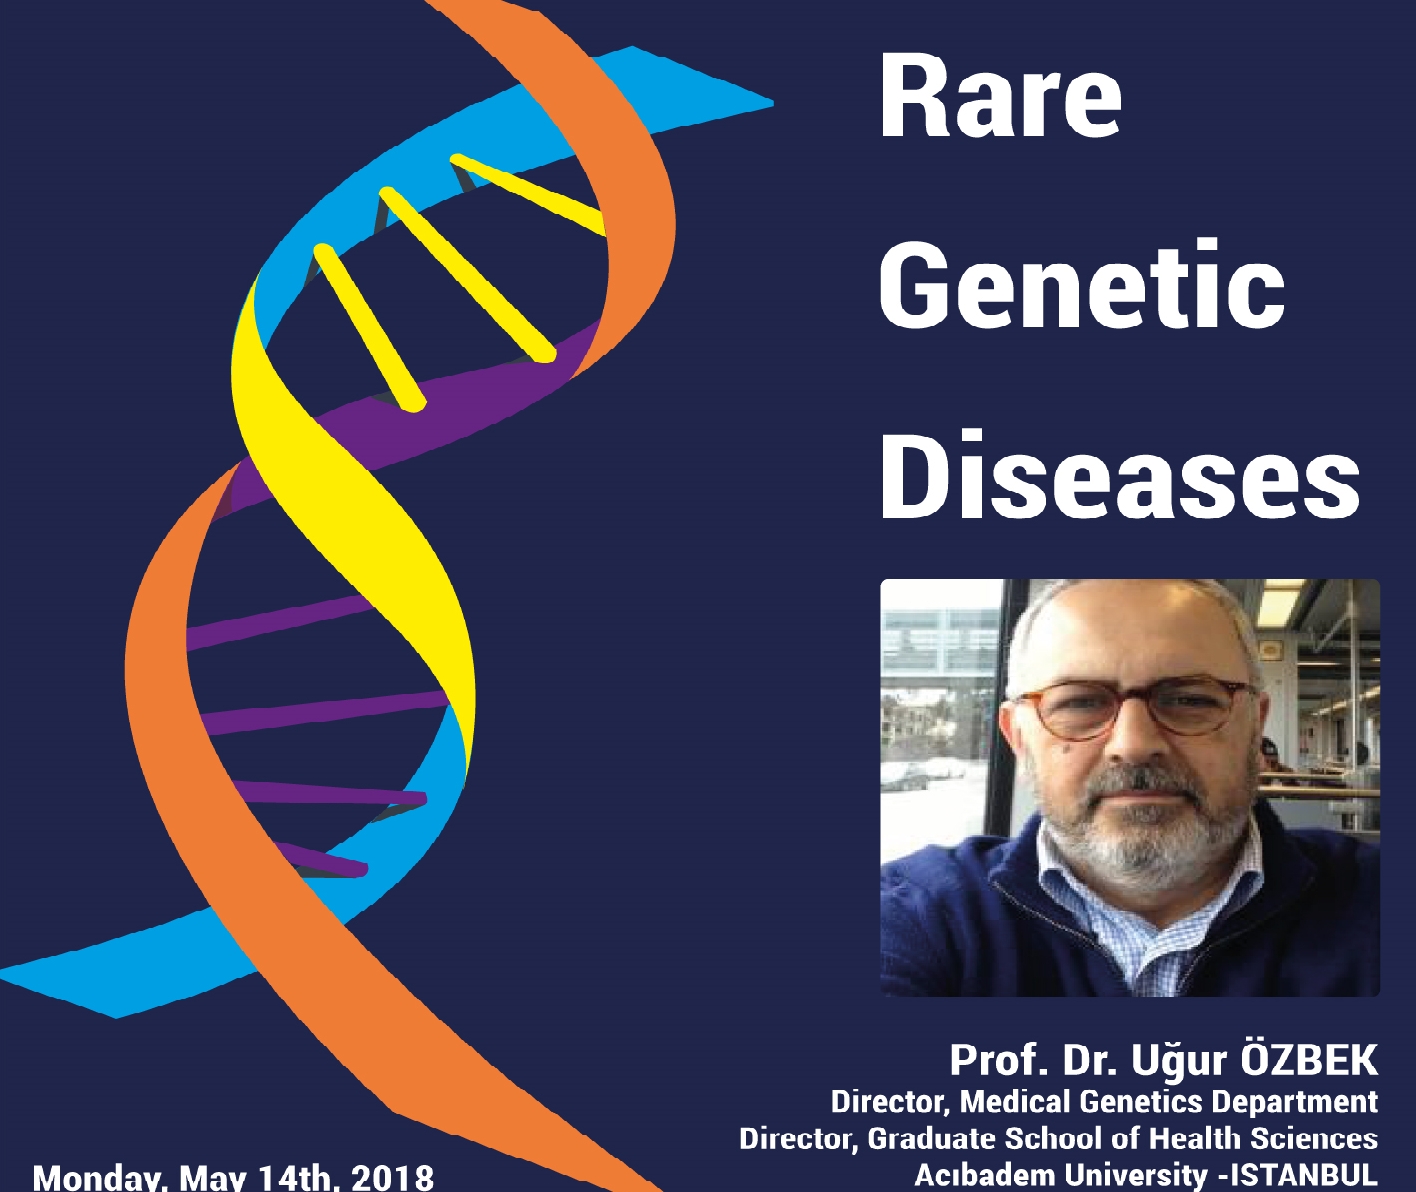 Conference: "Rare Genetic Diseases" by Prof. Dr. Uğur ÖZBEK on Monday, May 14th, 16:30, at M-01